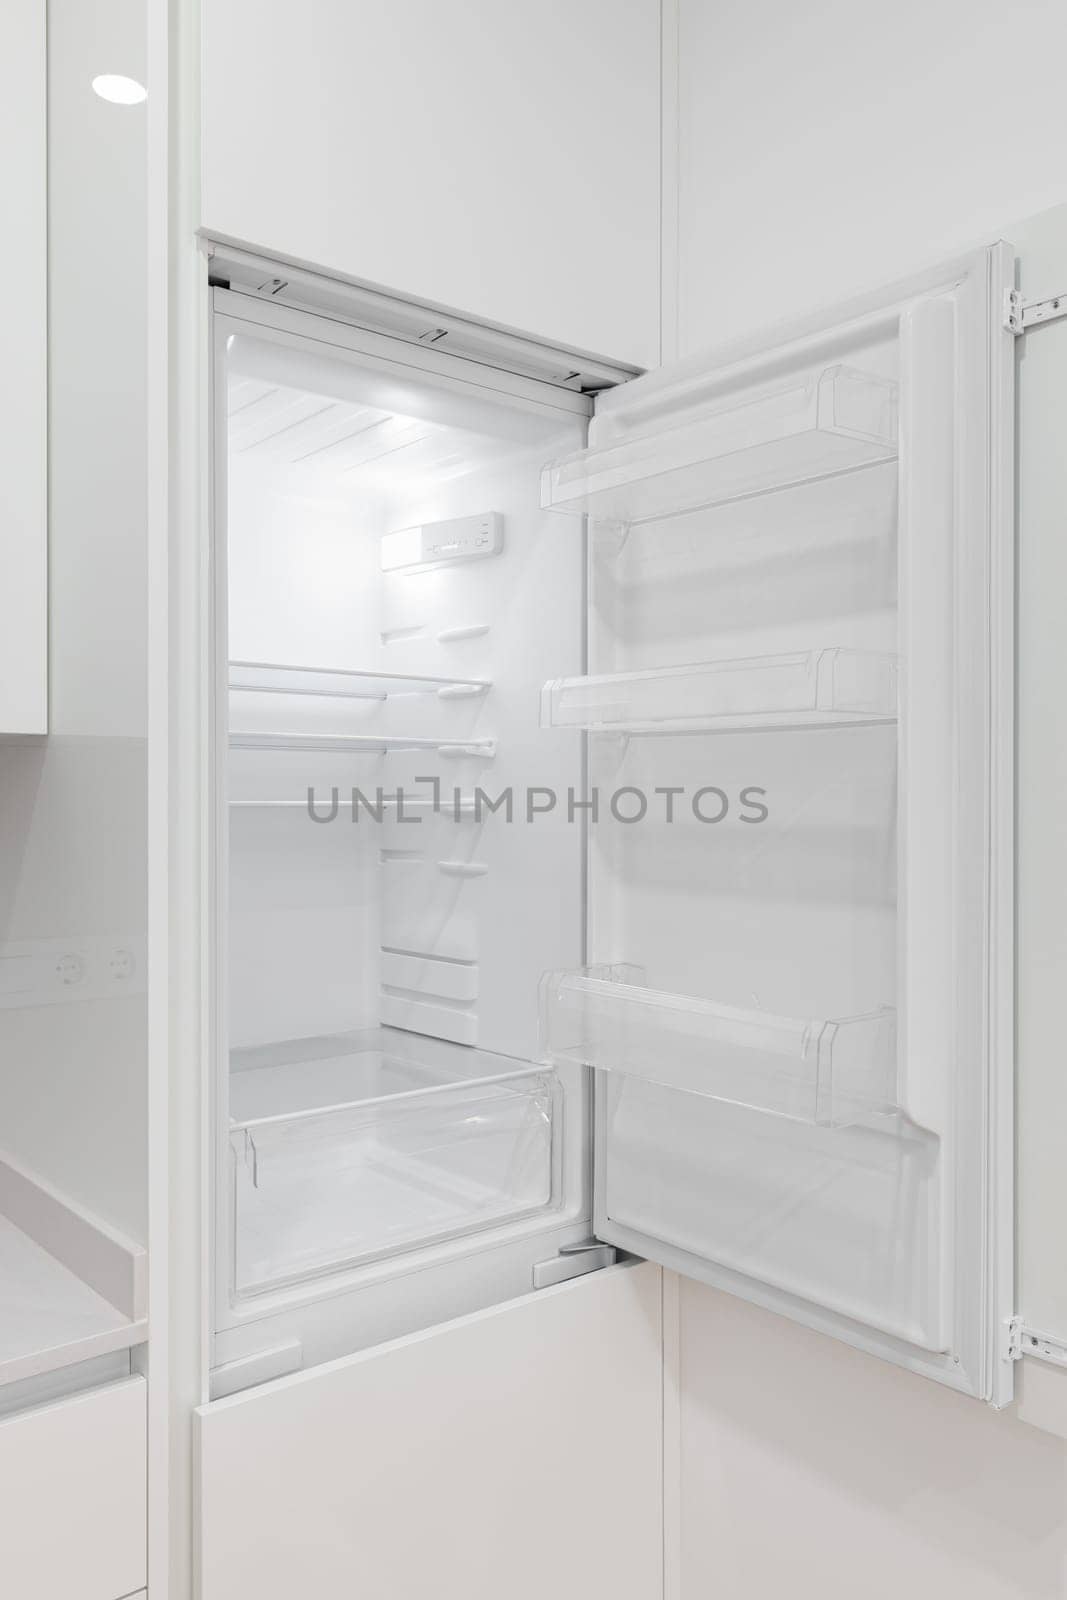 A white refrigerator with its door open in a kitchen